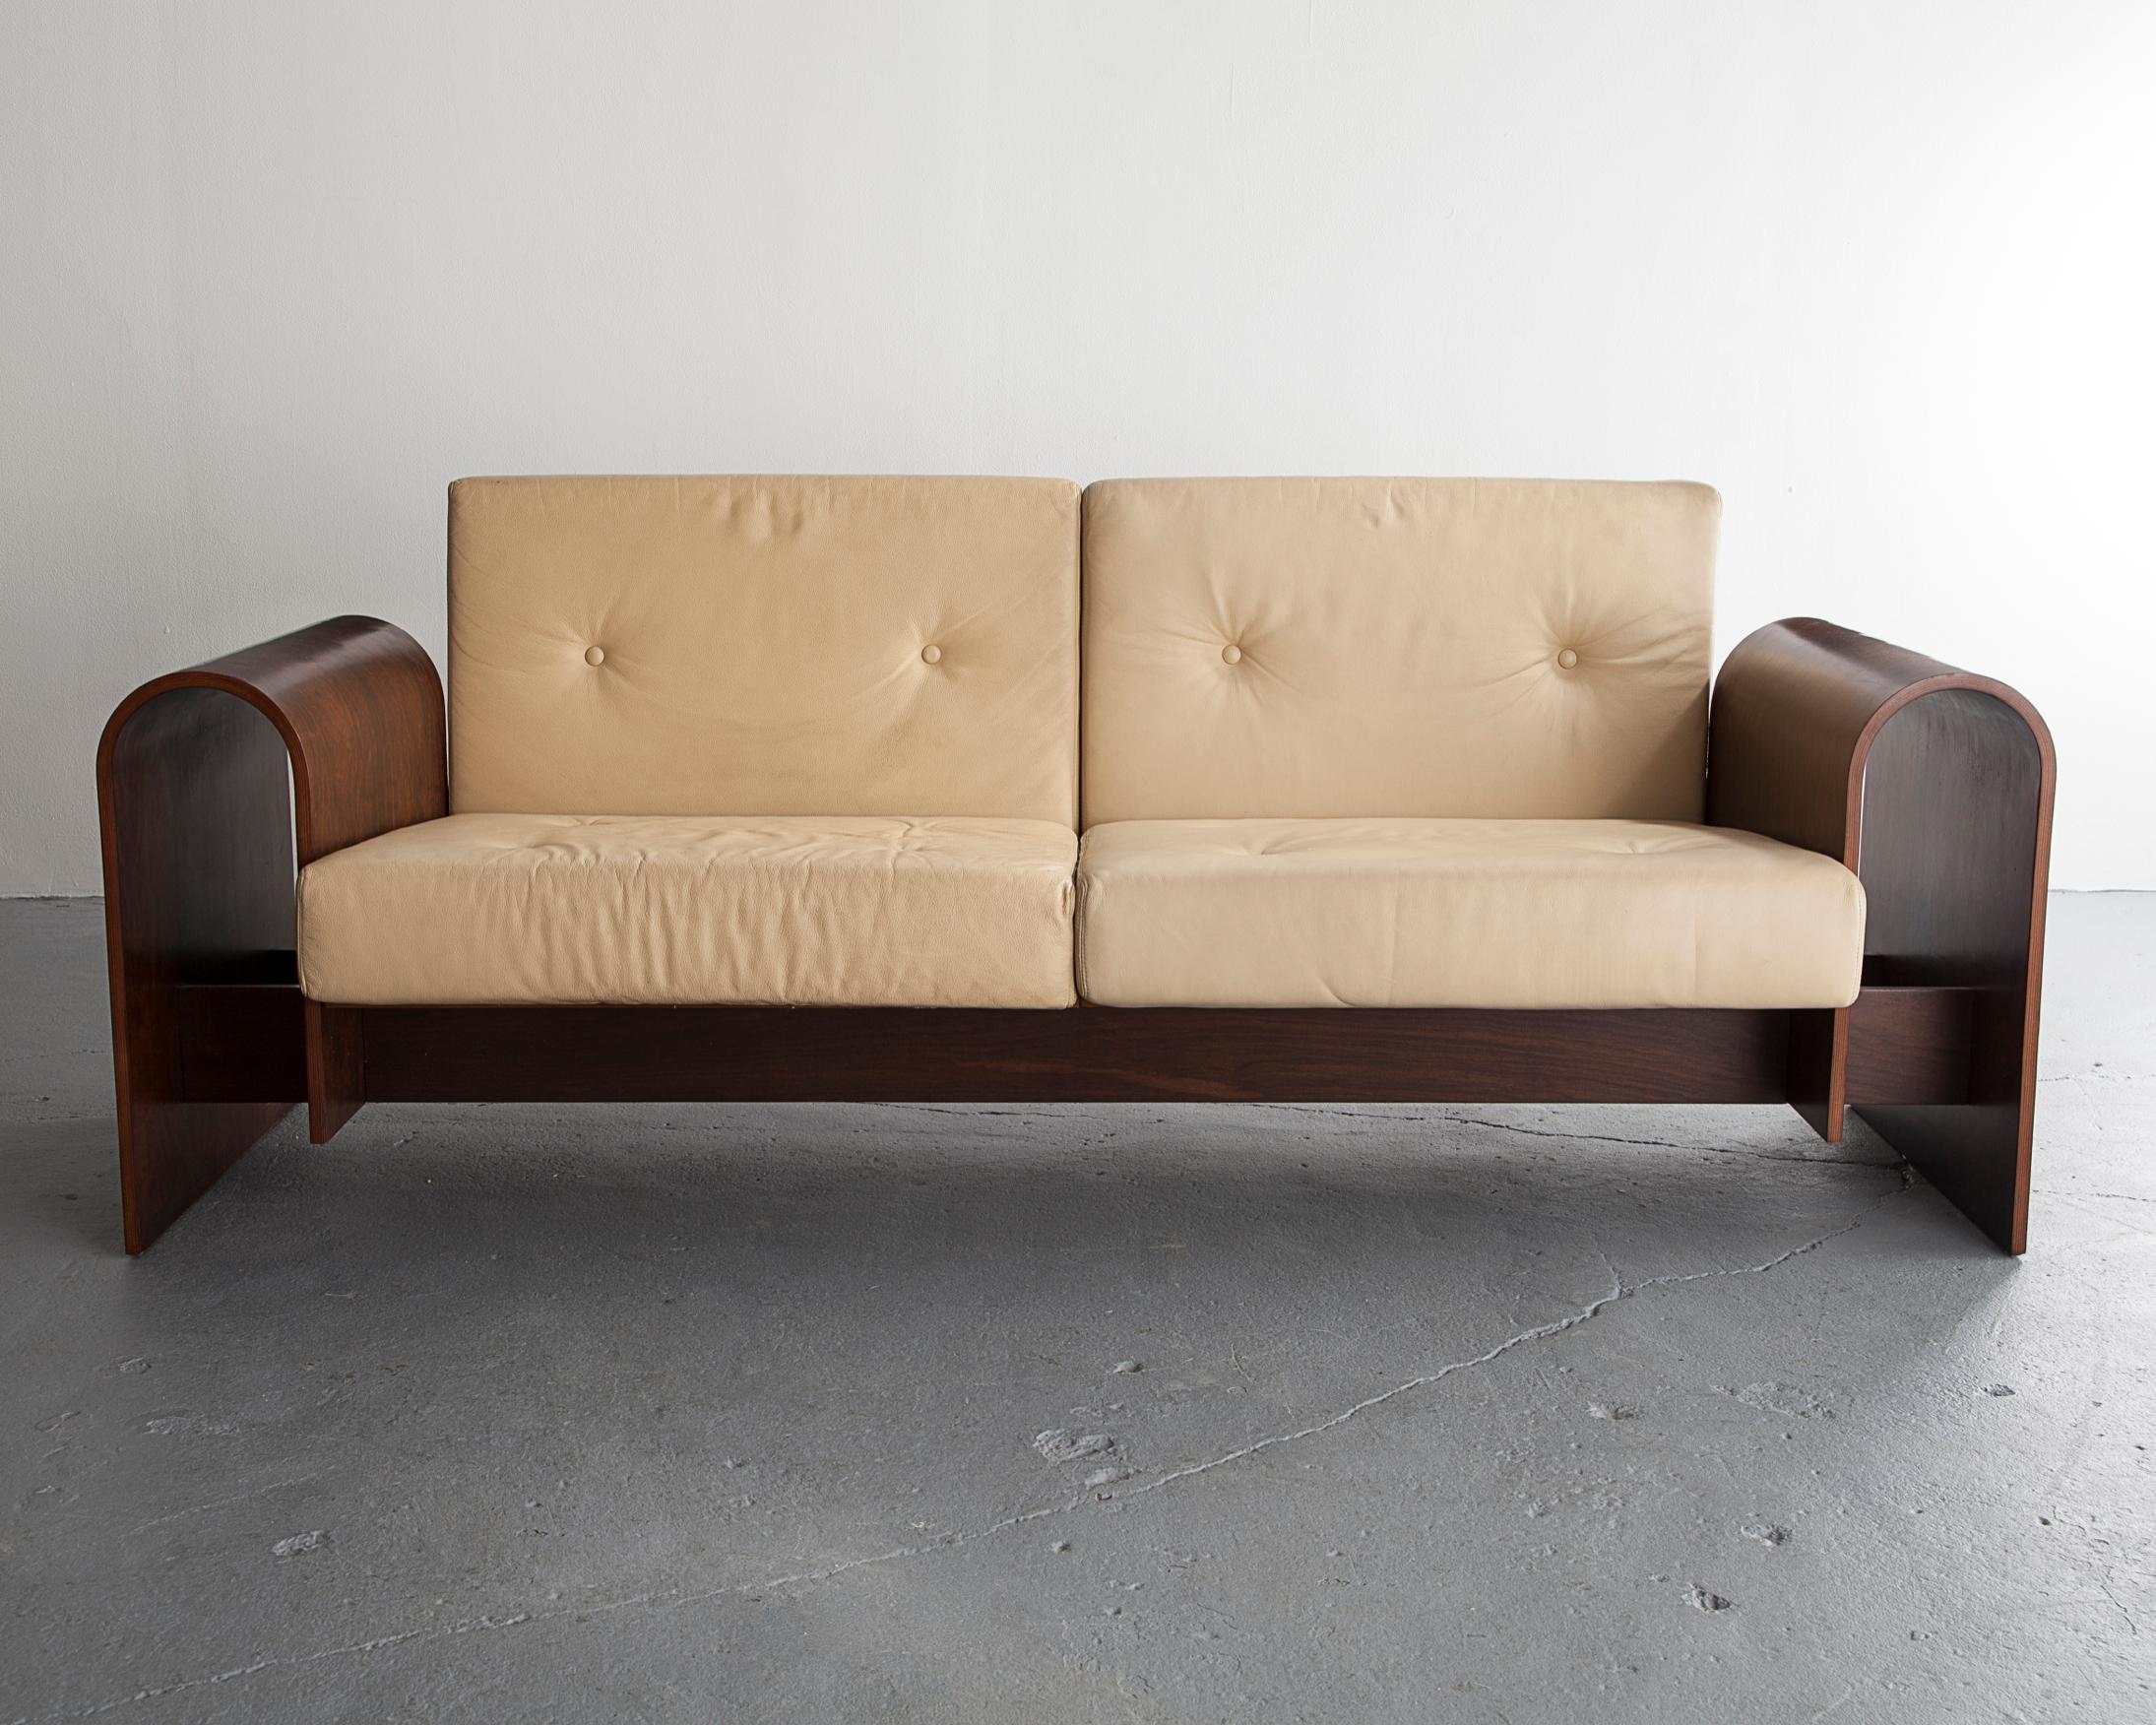 Two-seat sofa in rosewood veneer with upholstered cushions. Designed by Oscar Niemeyer for the SESC hotel, Brazil, 1990.